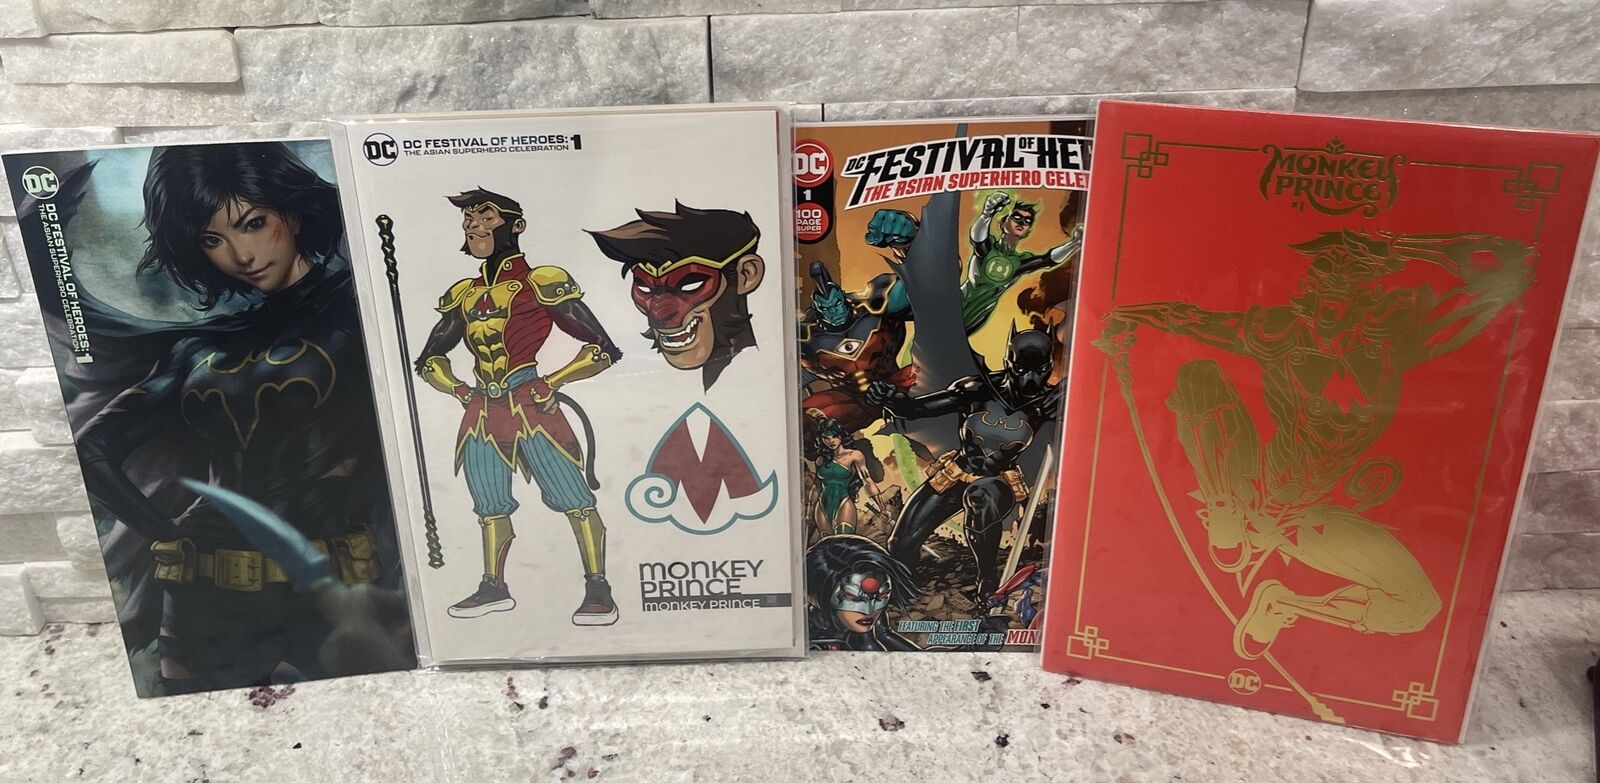 DC Festival Of Heroes #1 Set Chang 1:25 Variant 1st APP Monkey Prince All Shown